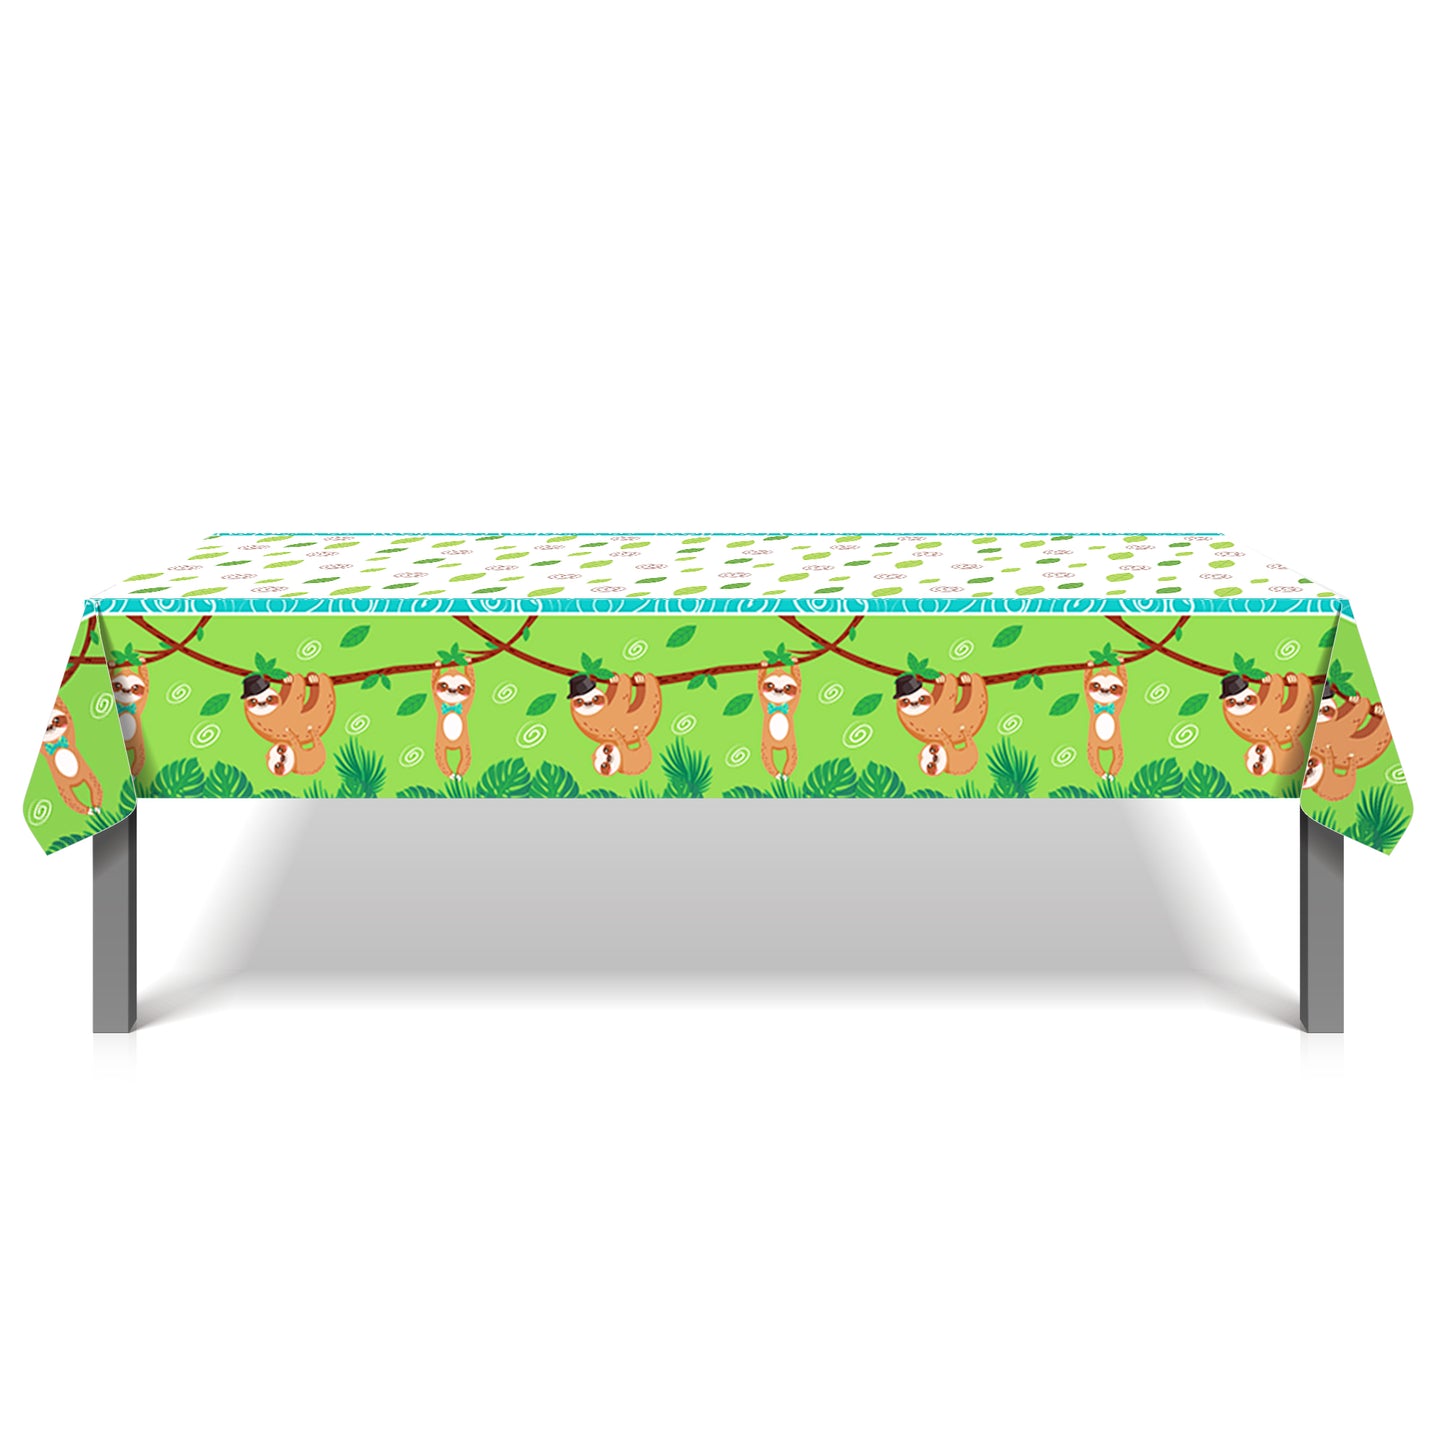 Hanging Sloth Table Cover